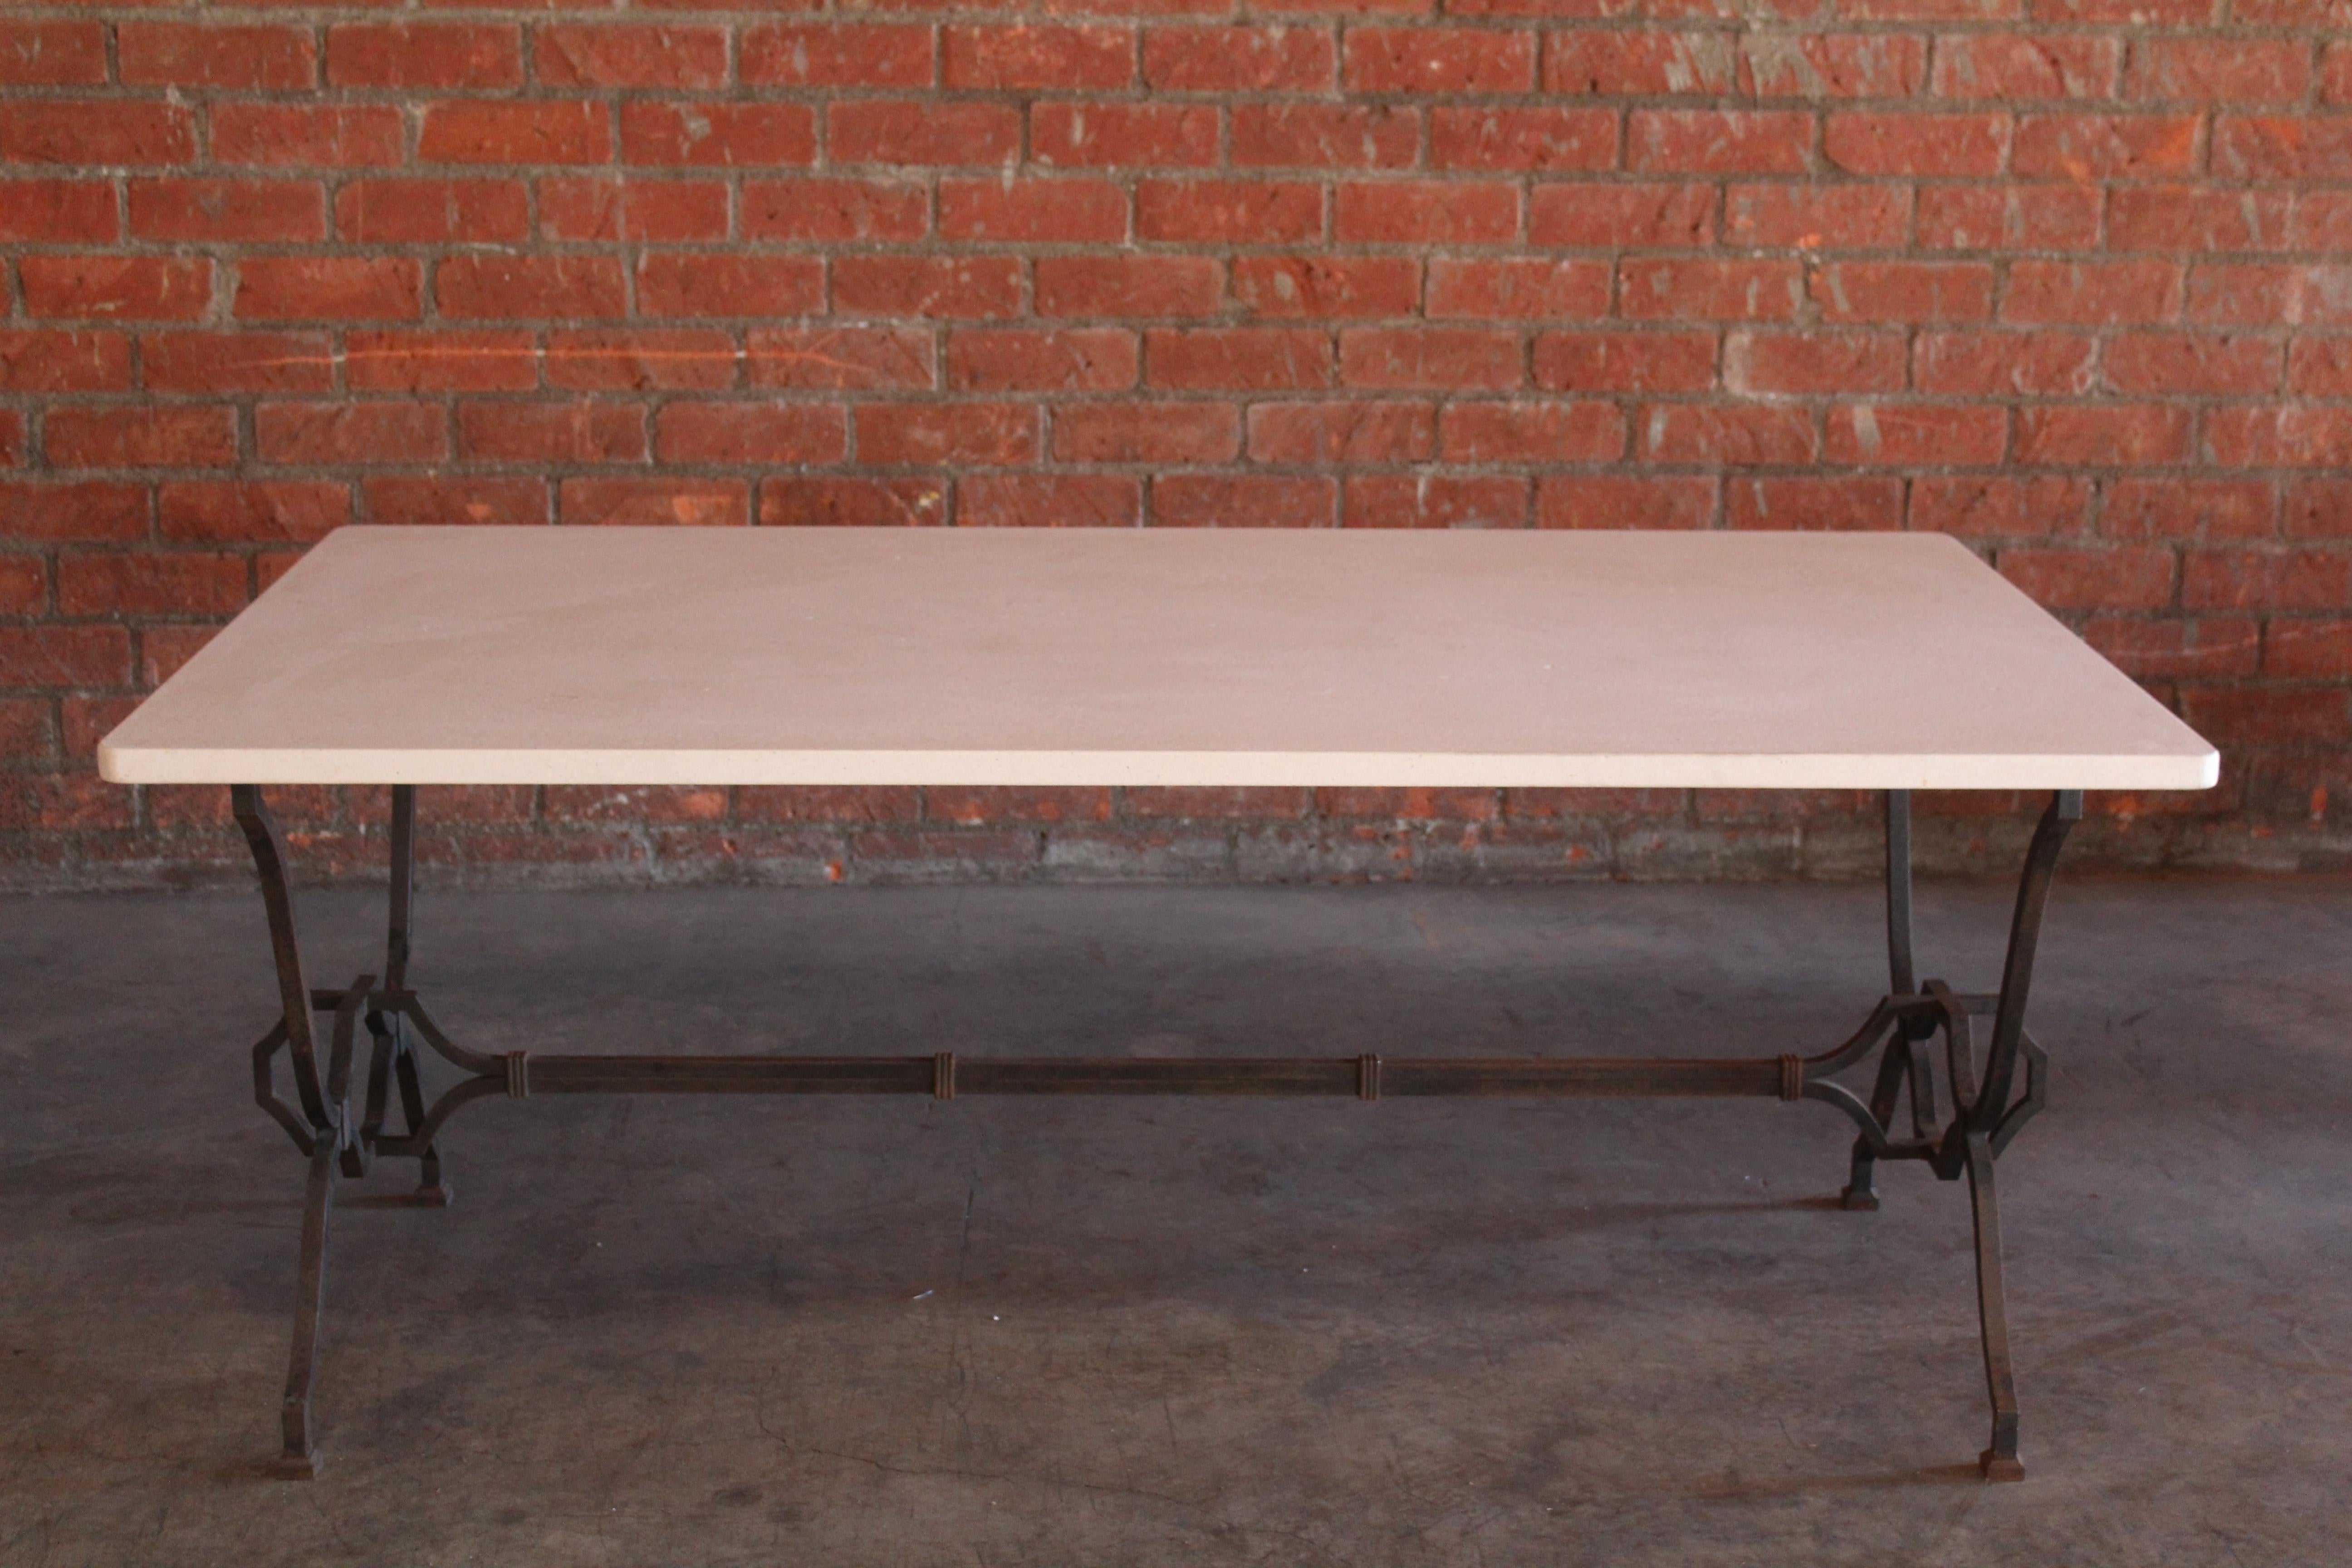 1940s French Wrought Iron and Limestone Table by Colette Gueden for René Prou For Sale 5